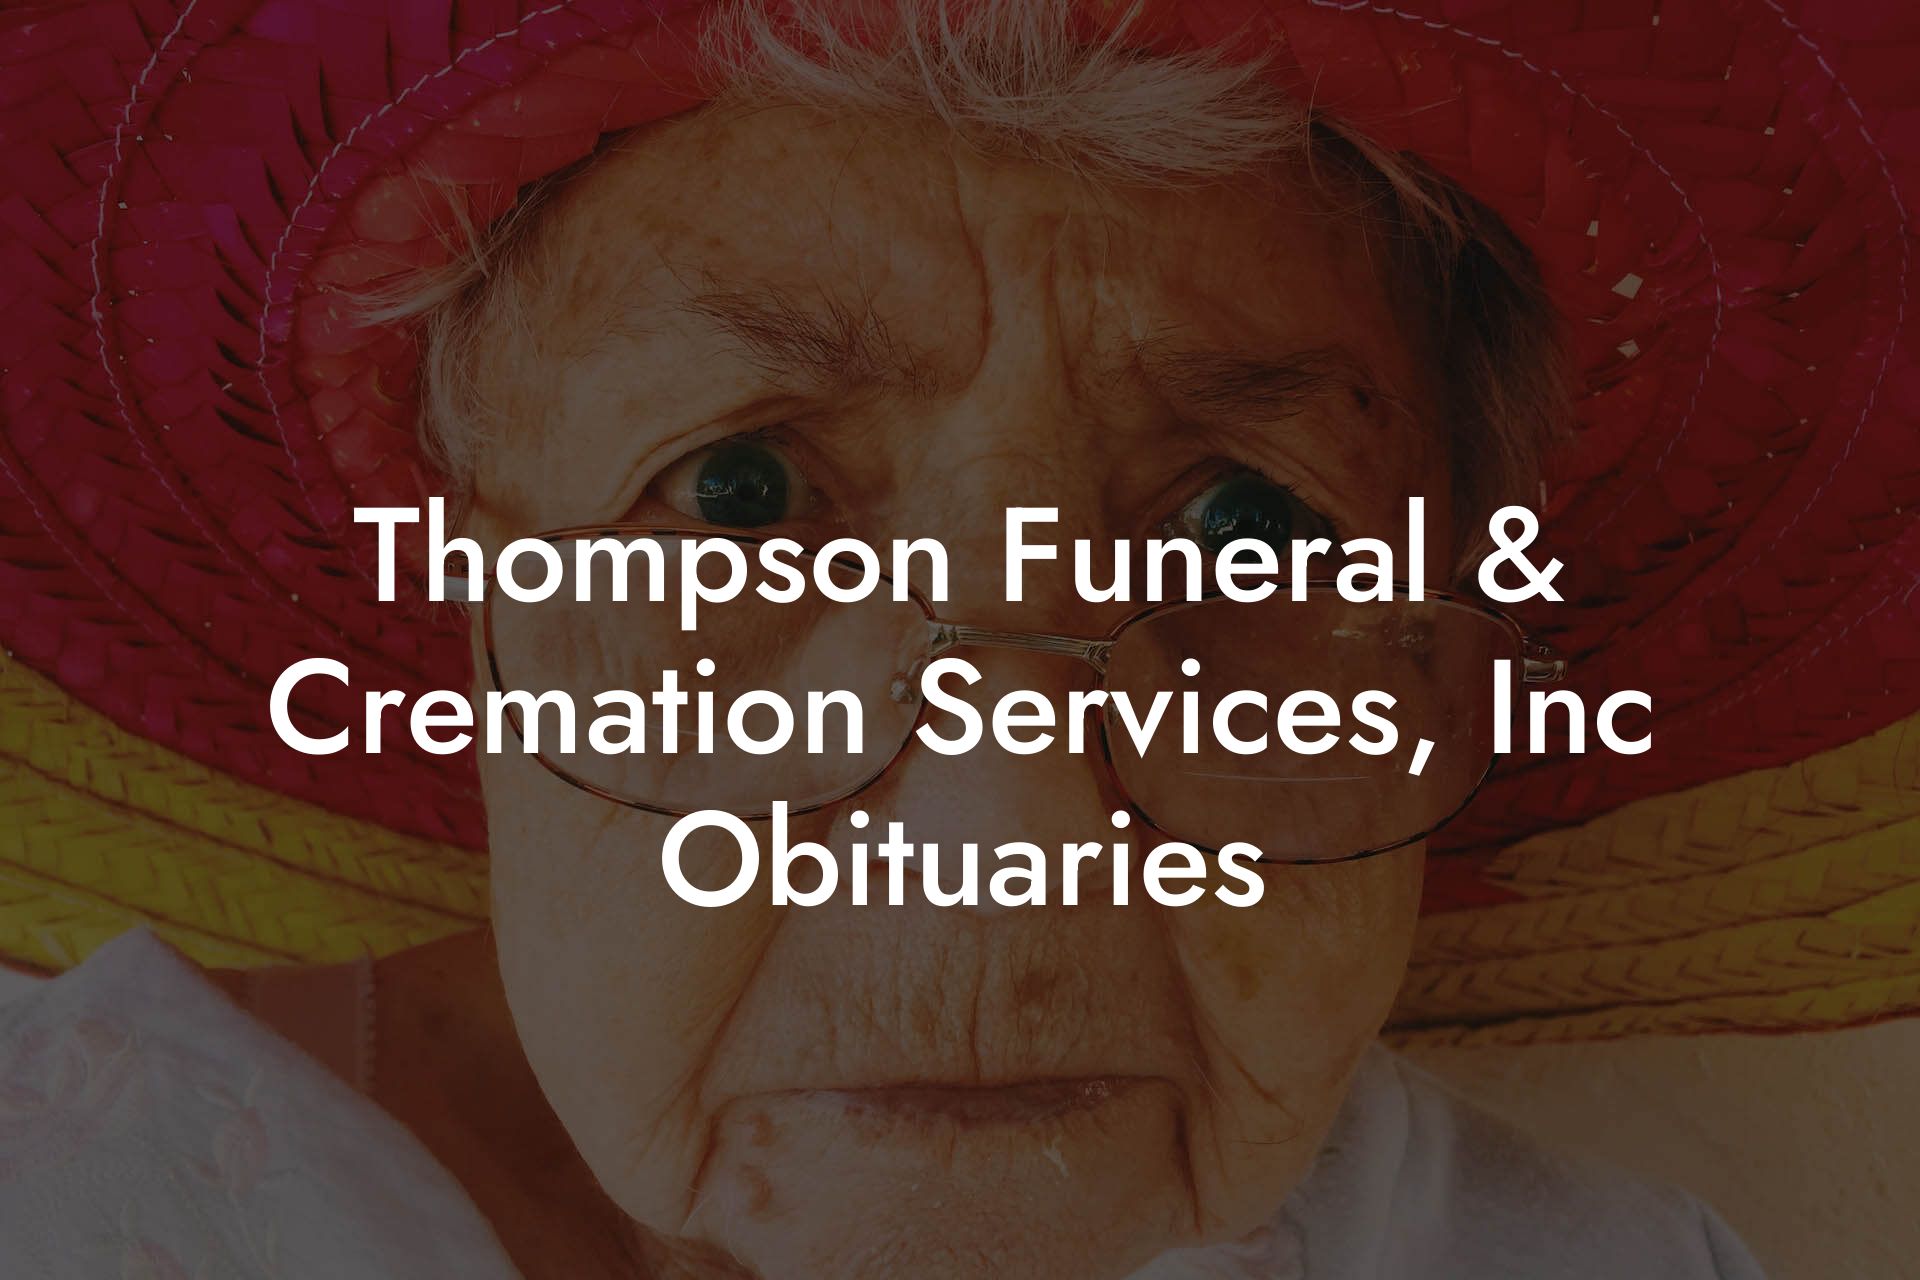 Thompson Funeral & Cremation Services, Inc Obituaries